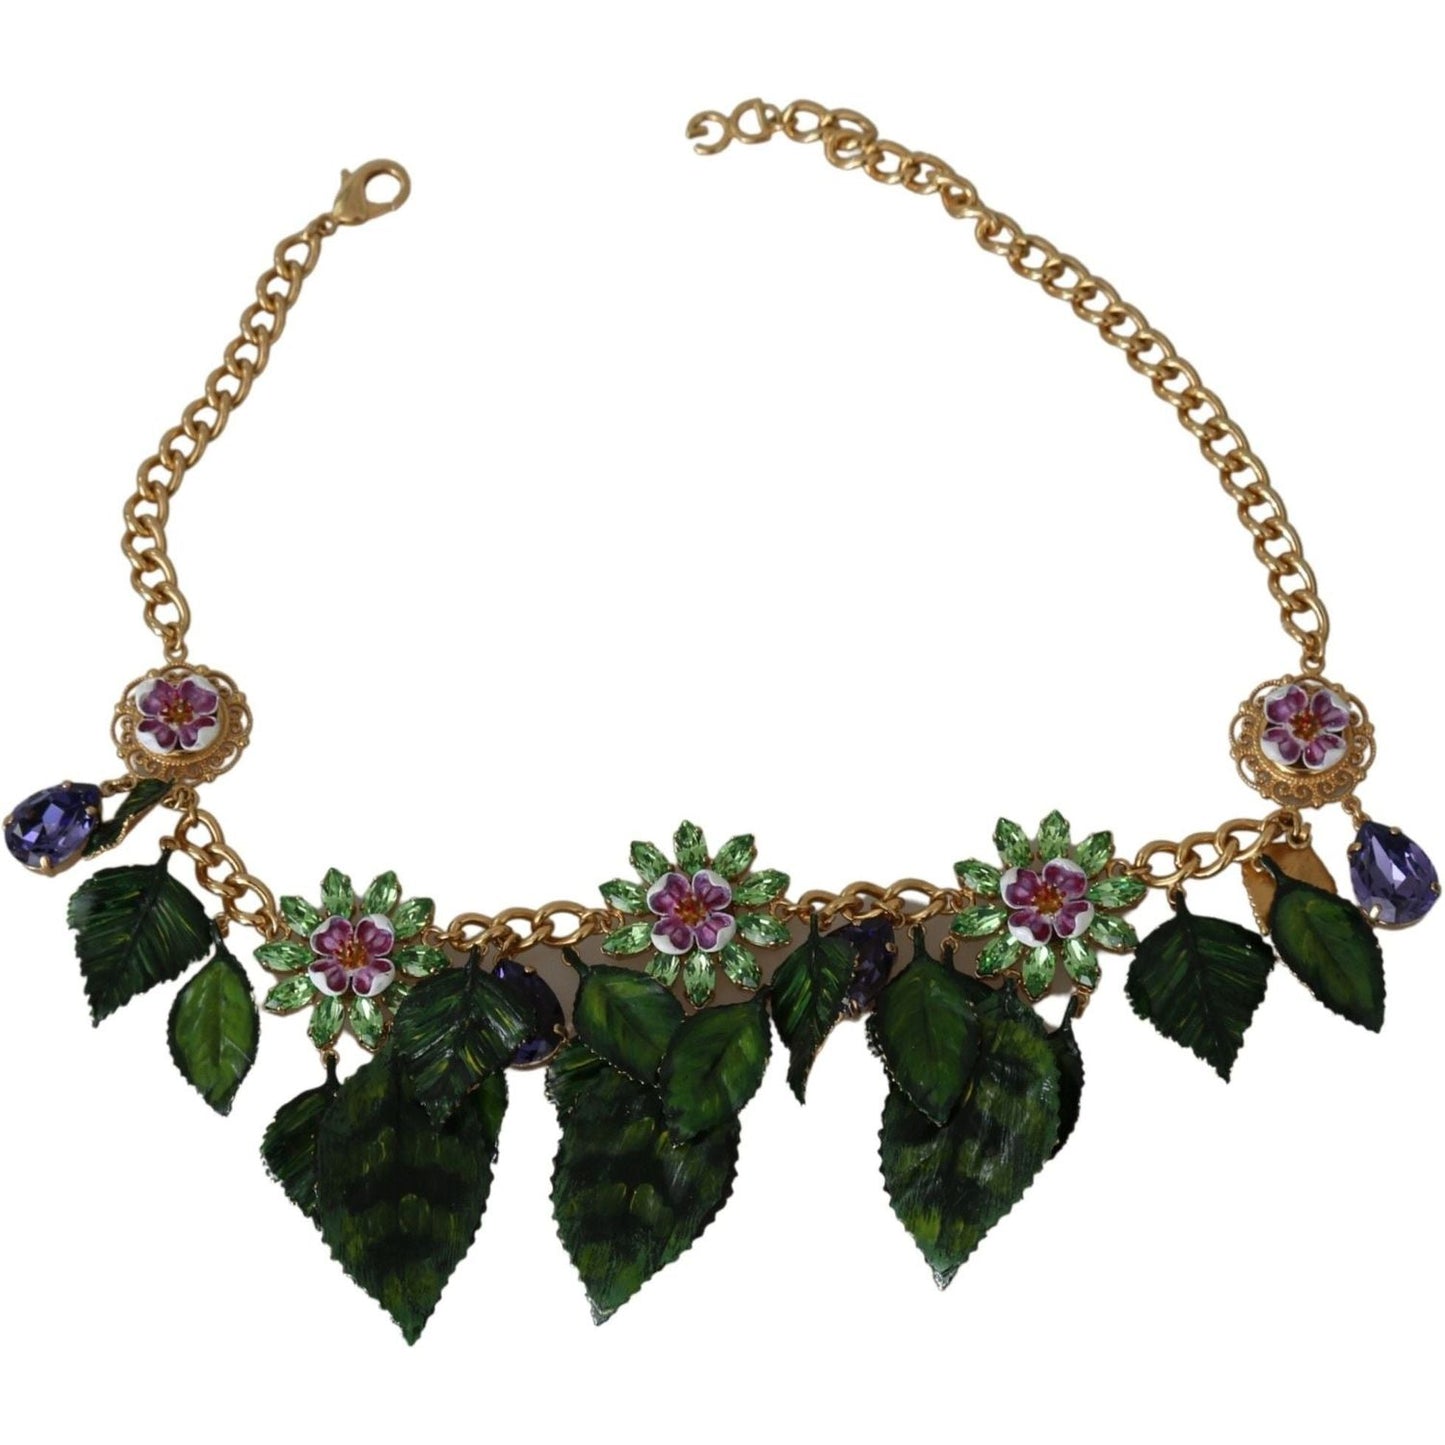 Dolce & Gabbana Elegant Crystal Charms Leaves Pendant Necklace Necklace green-leaves-gold-brass-crystal-flower-pendant-necklace